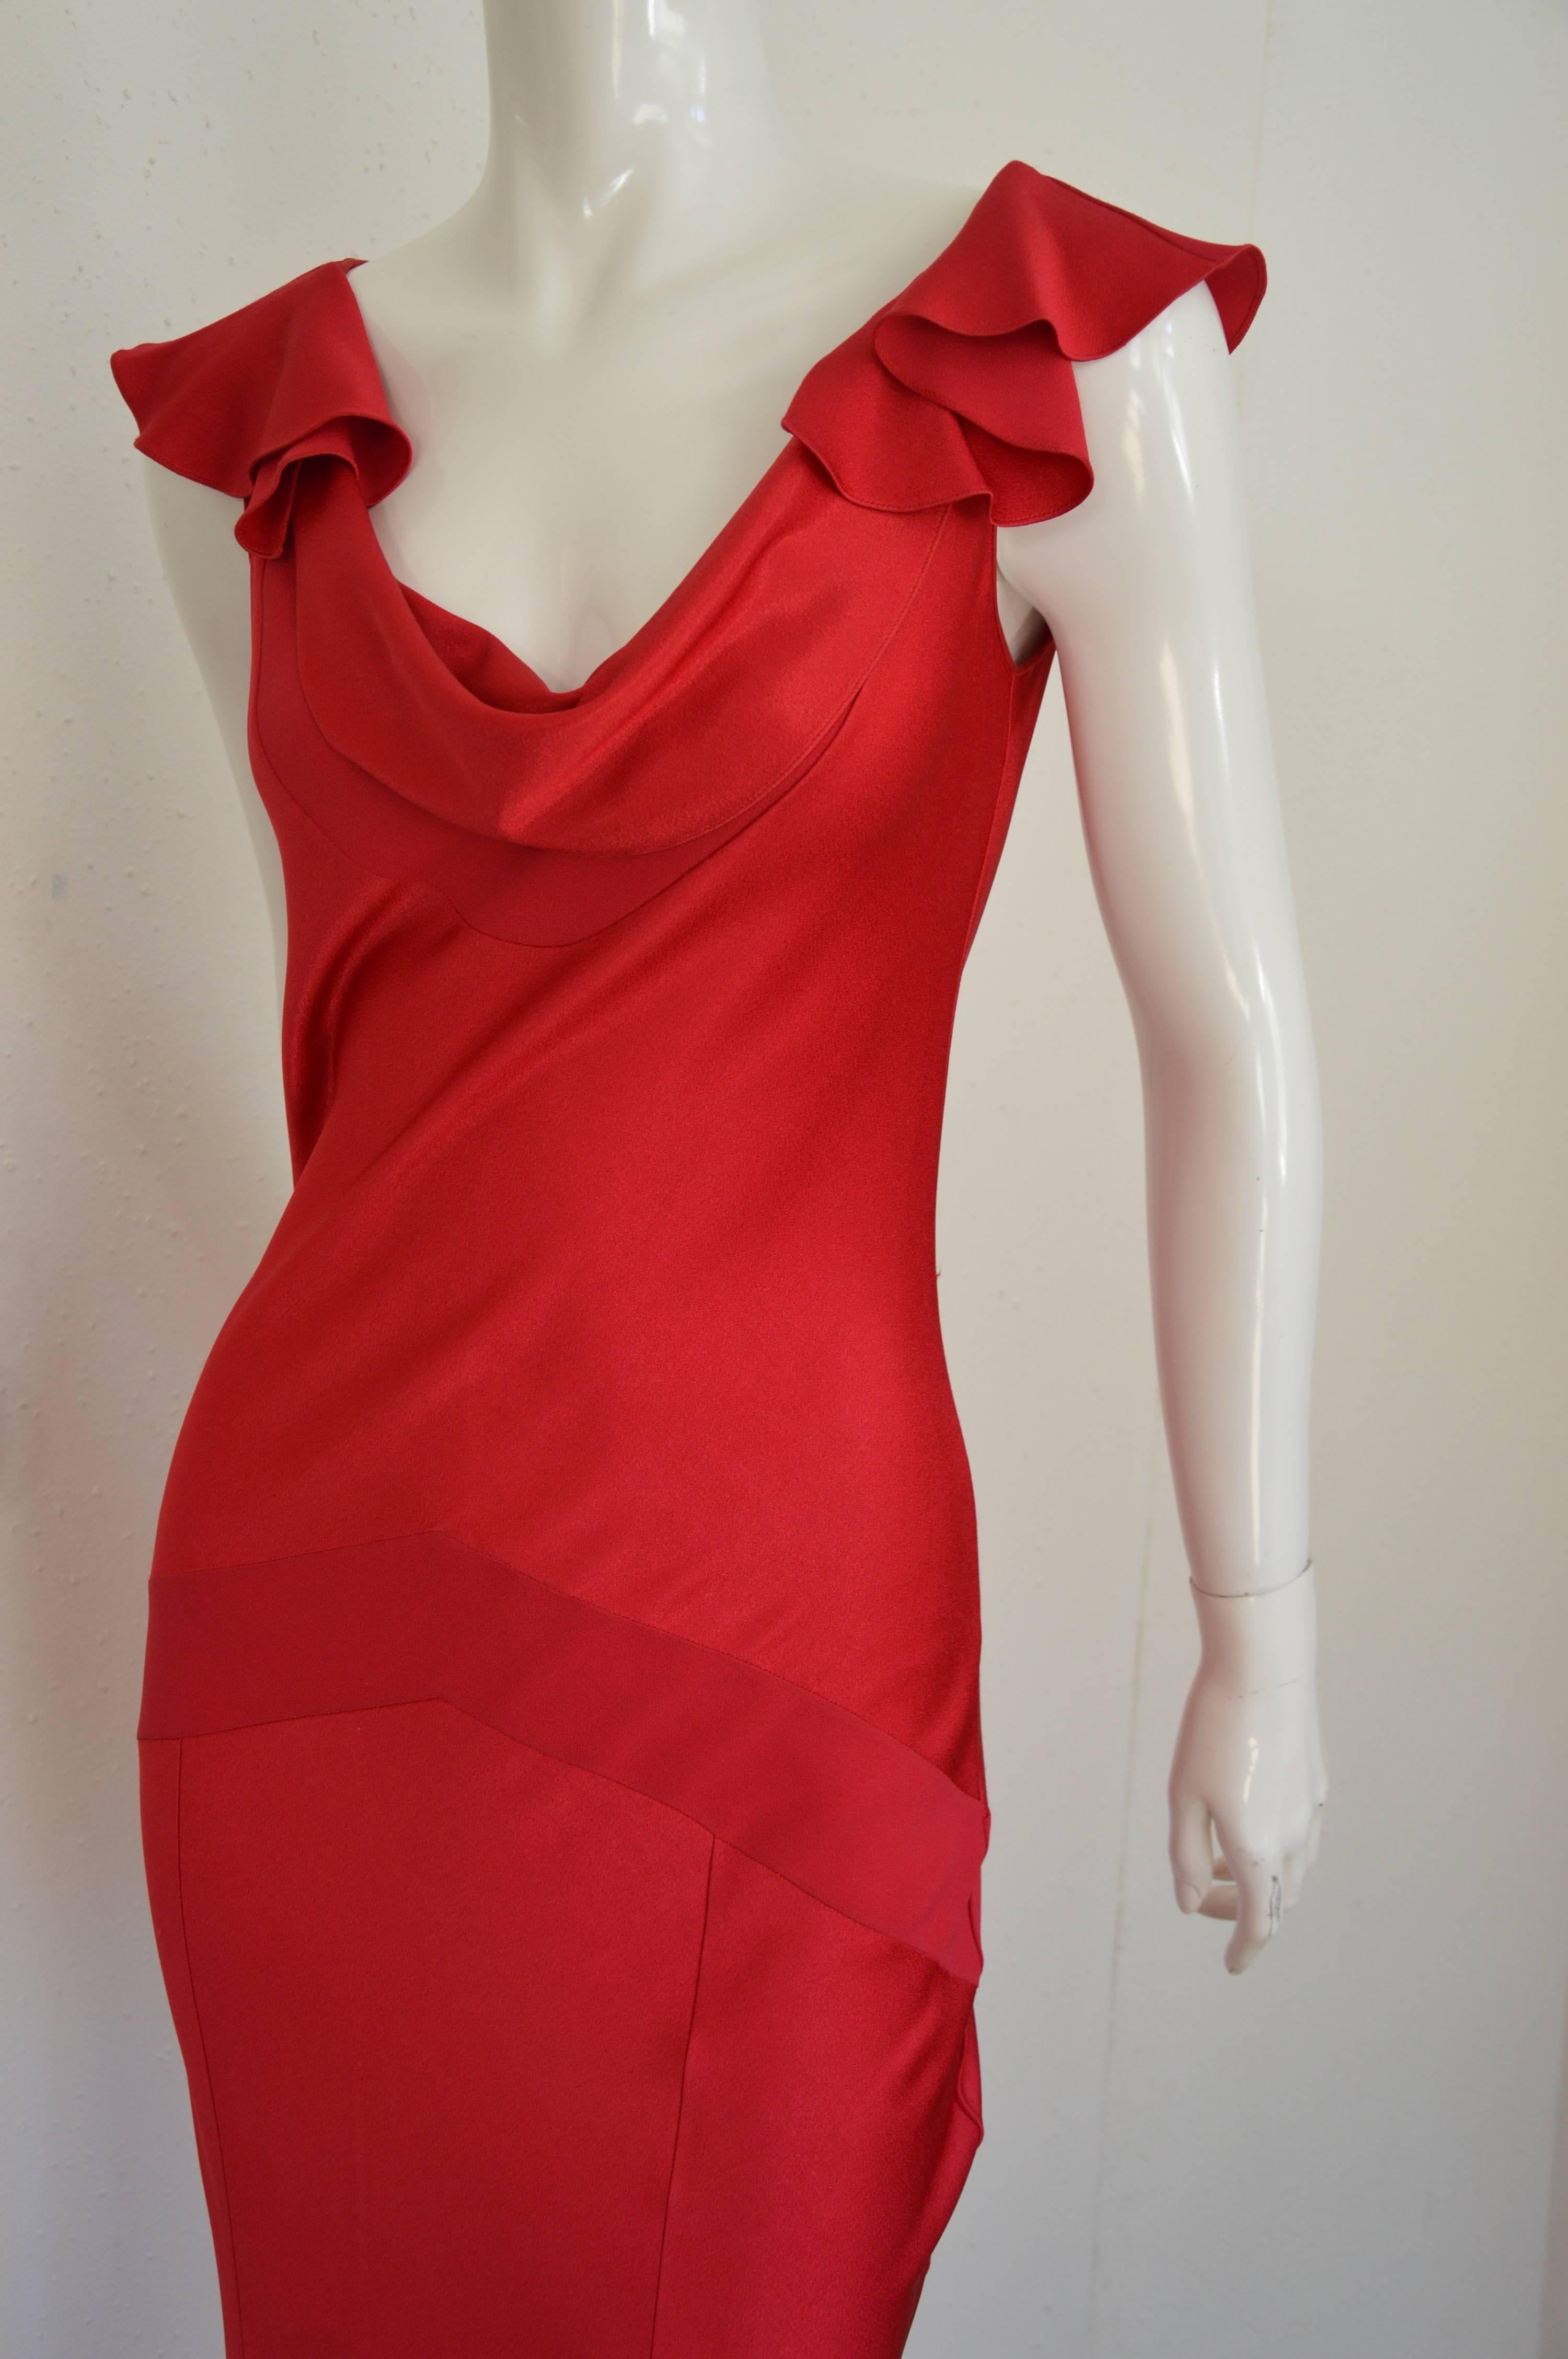 Vintage John Galliano red satiné sleeveless cocktail dress featuring ruffles at the shoulders and a graphic sewing technic at the lower waist. 
Measurements :
Bust : 84 cm 
Waist : 76 cm
Hips : 88 cm
Total Length : 1m50